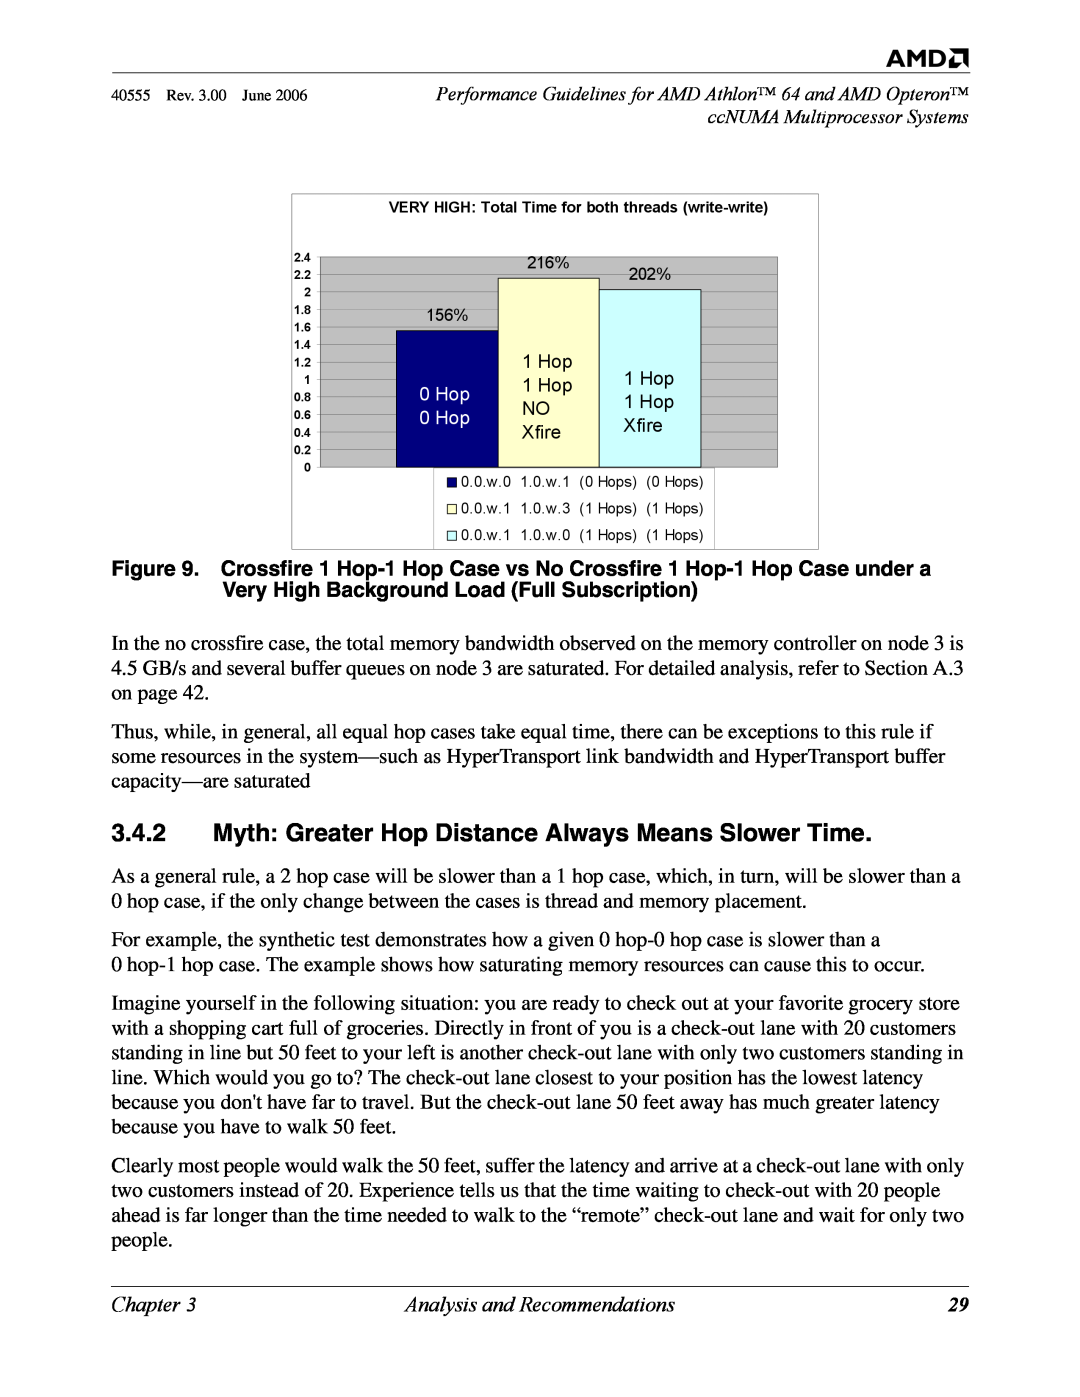 AMD 64 manual Myth Greater Hop Distance Always Means Slower Time, Chapter, Analysis and Recommendations, 216%, 202% 